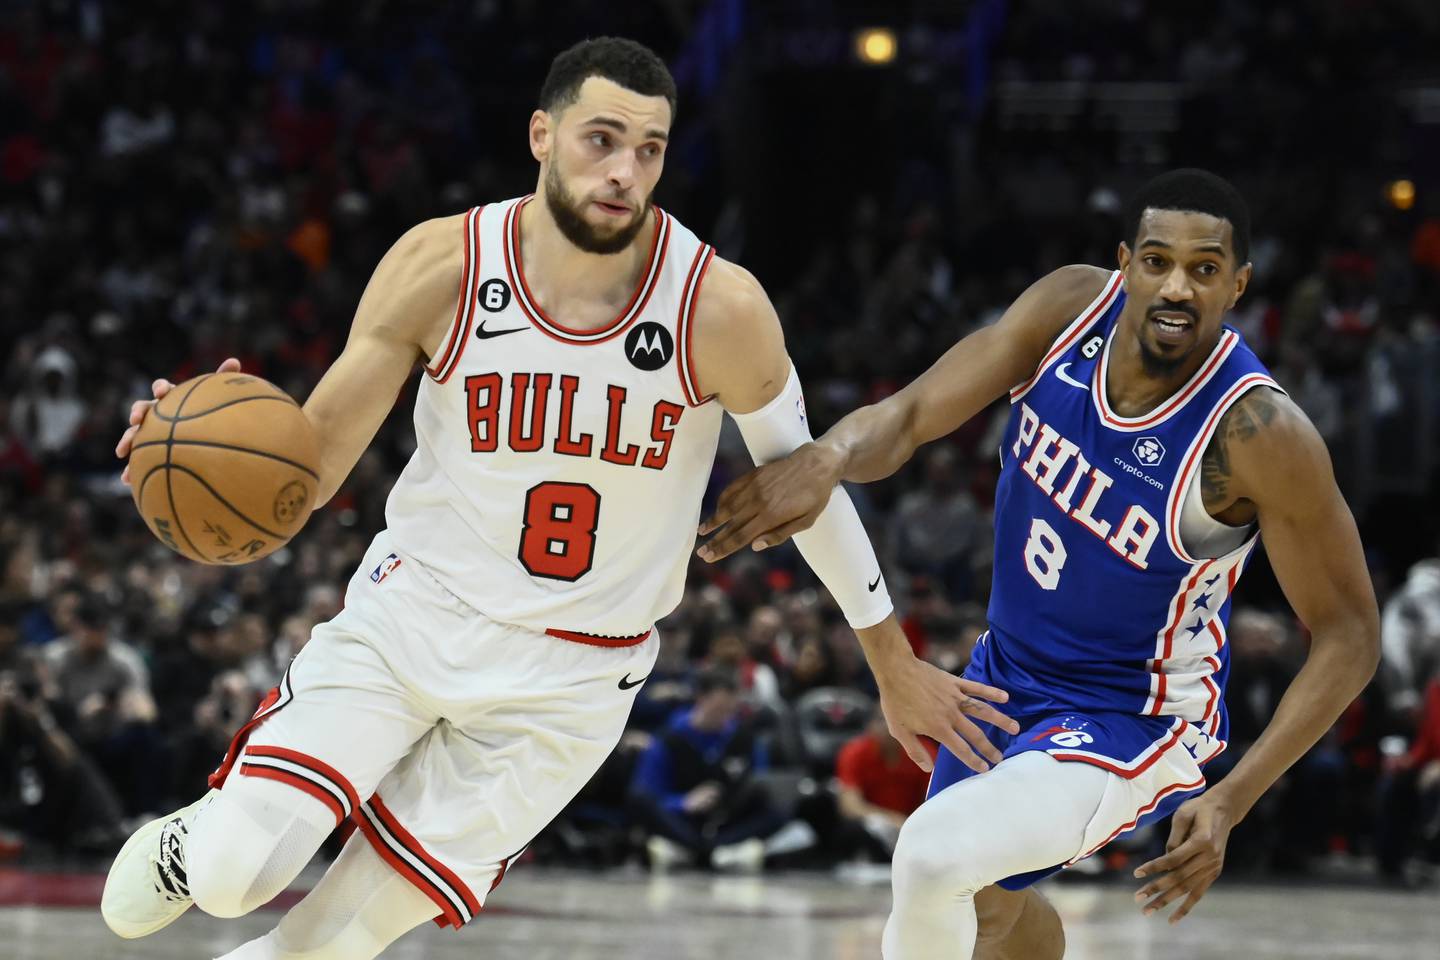 Bulls guard Zach LaVine (8) drives against 76ers guard De'Anthony Melton (8) during the second half Saturday, Oct. 29, 2022, at the United Center.